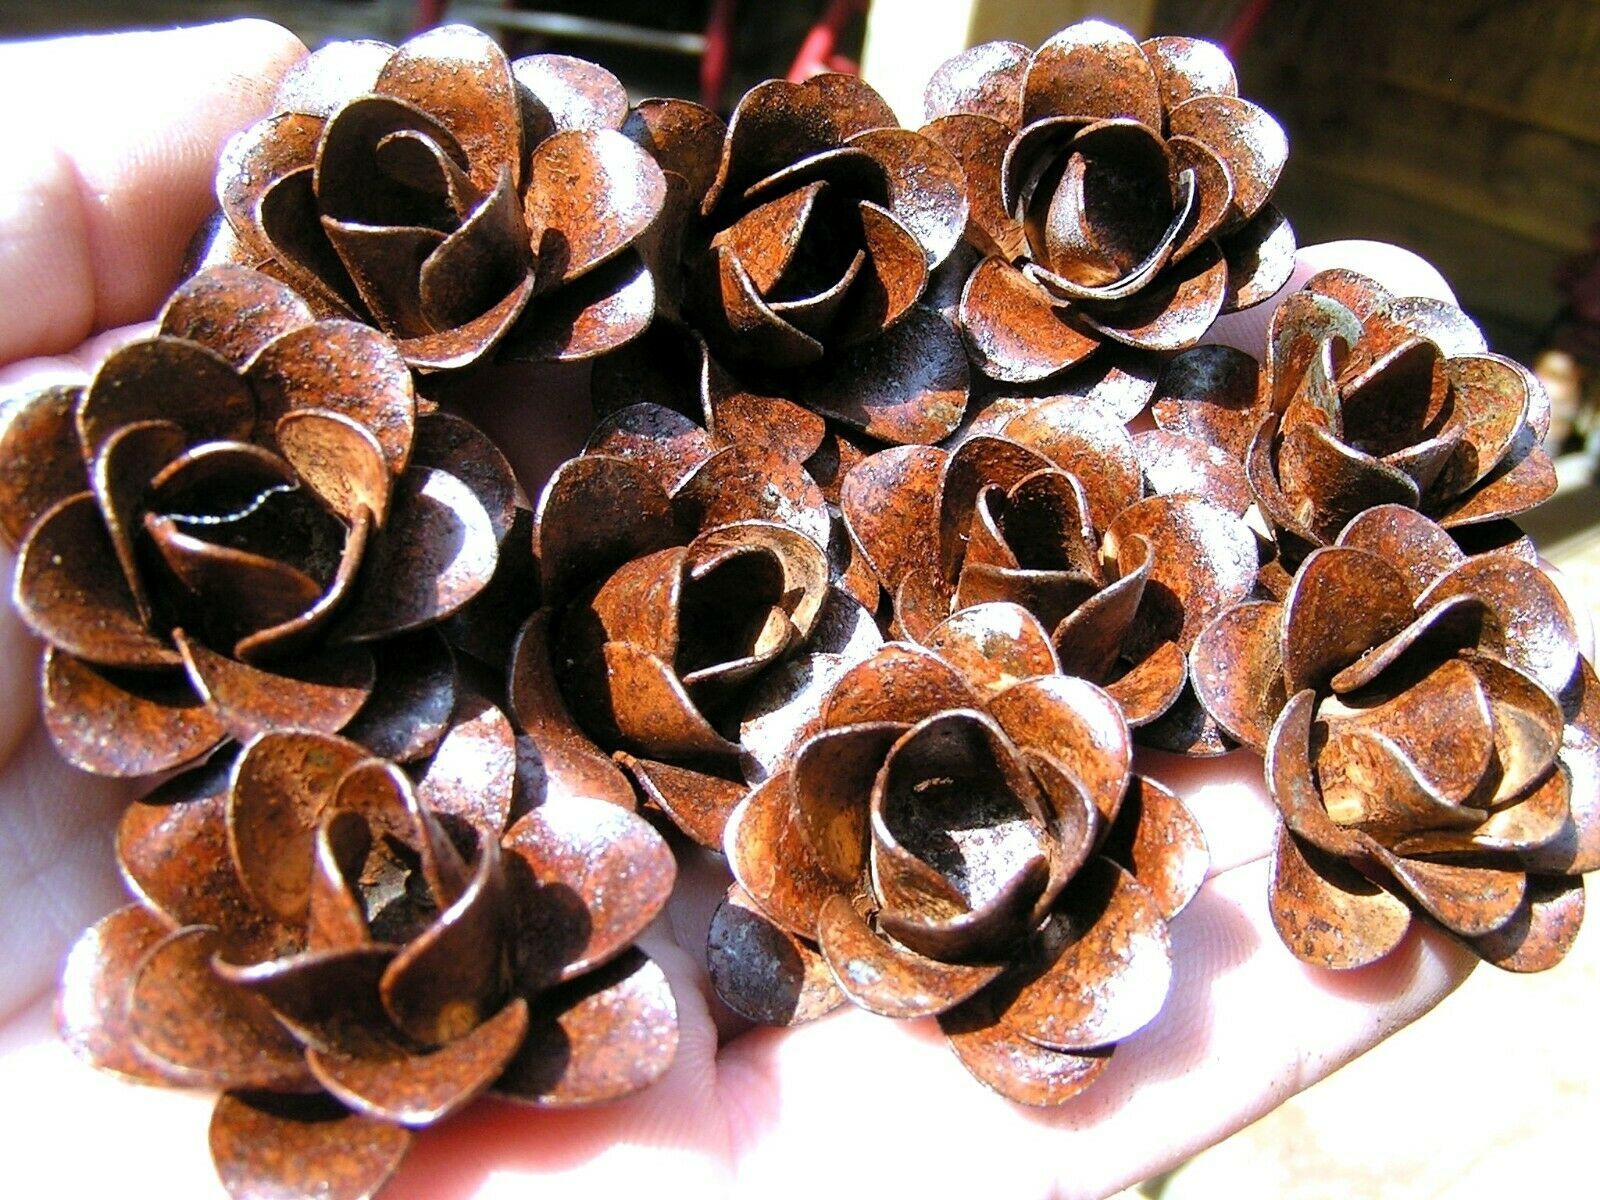 10 Rusty Metal Roses, Flowers For Crafts, Jewelry, Embellishment